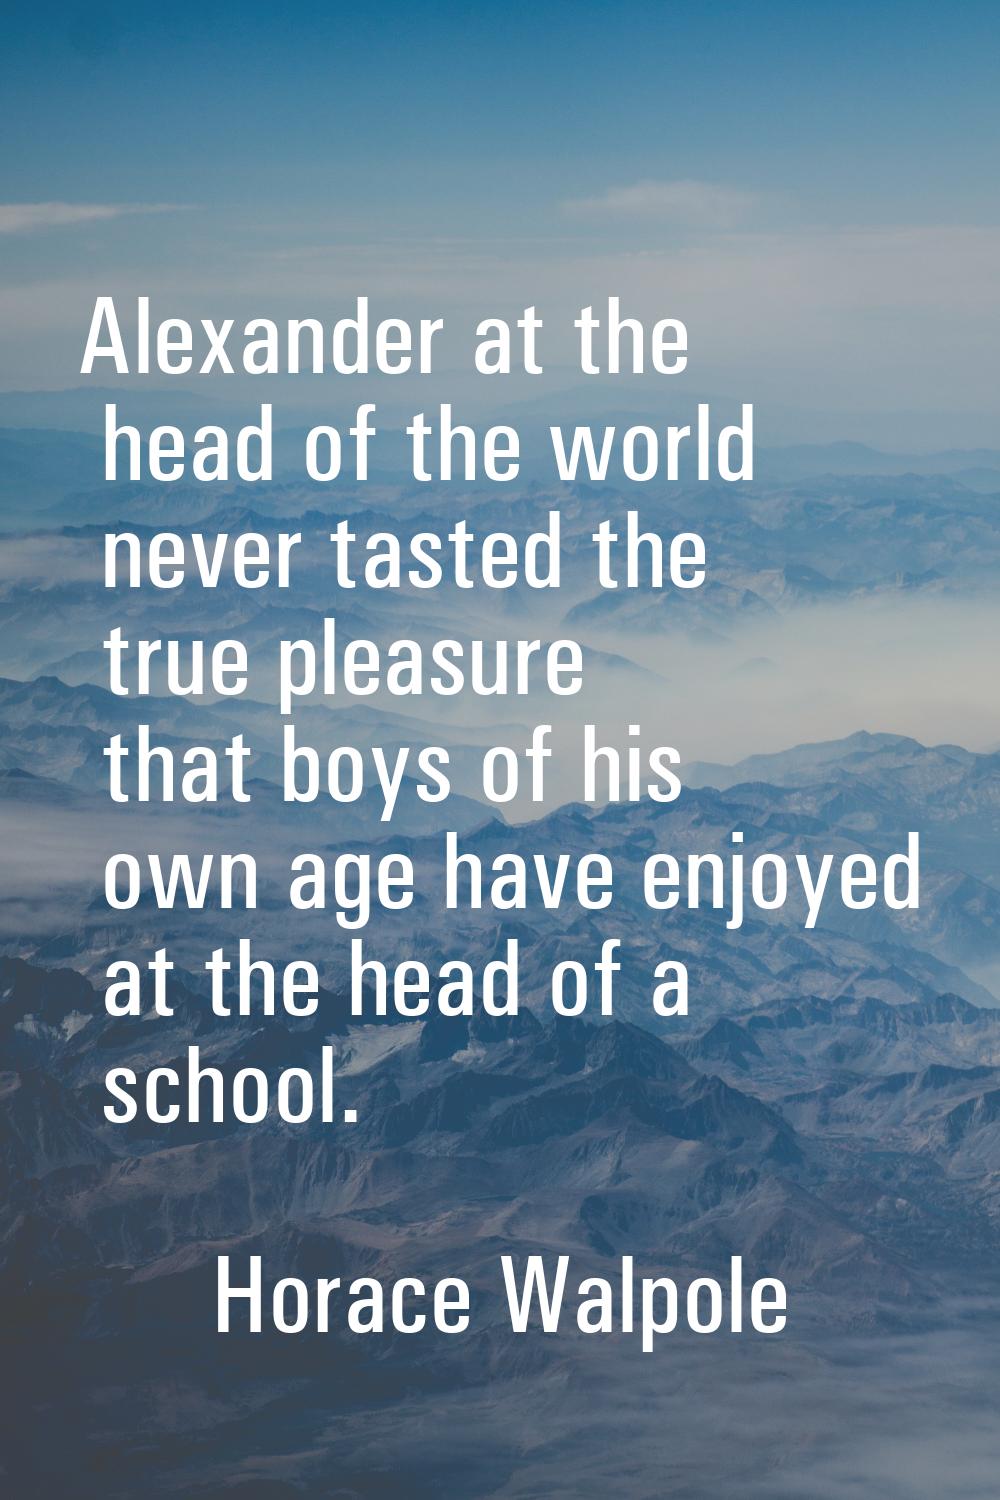 Alexander at the head of the world never tasted the true pleasure that boys of his own age have enj